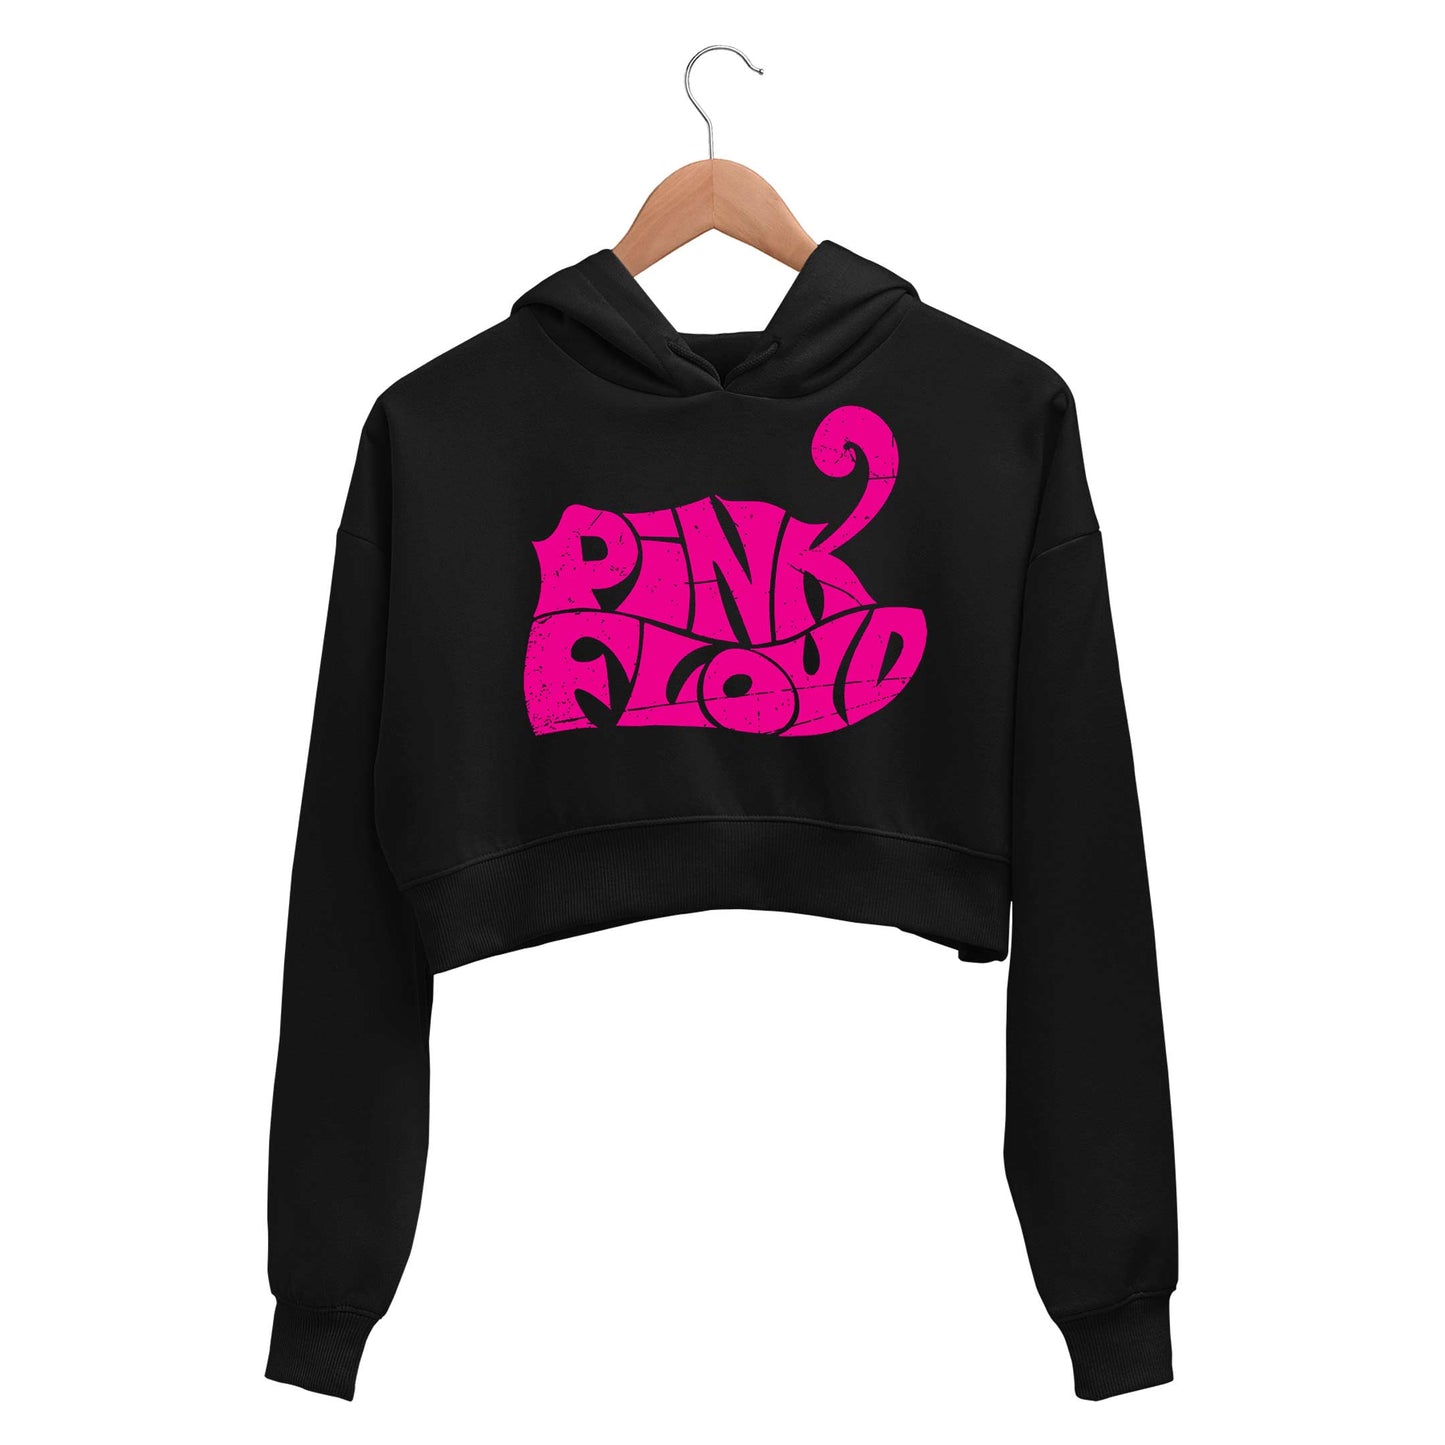 Pink Floyd Crop Hoodie - On Sale - XS (Chest size 32 IN)